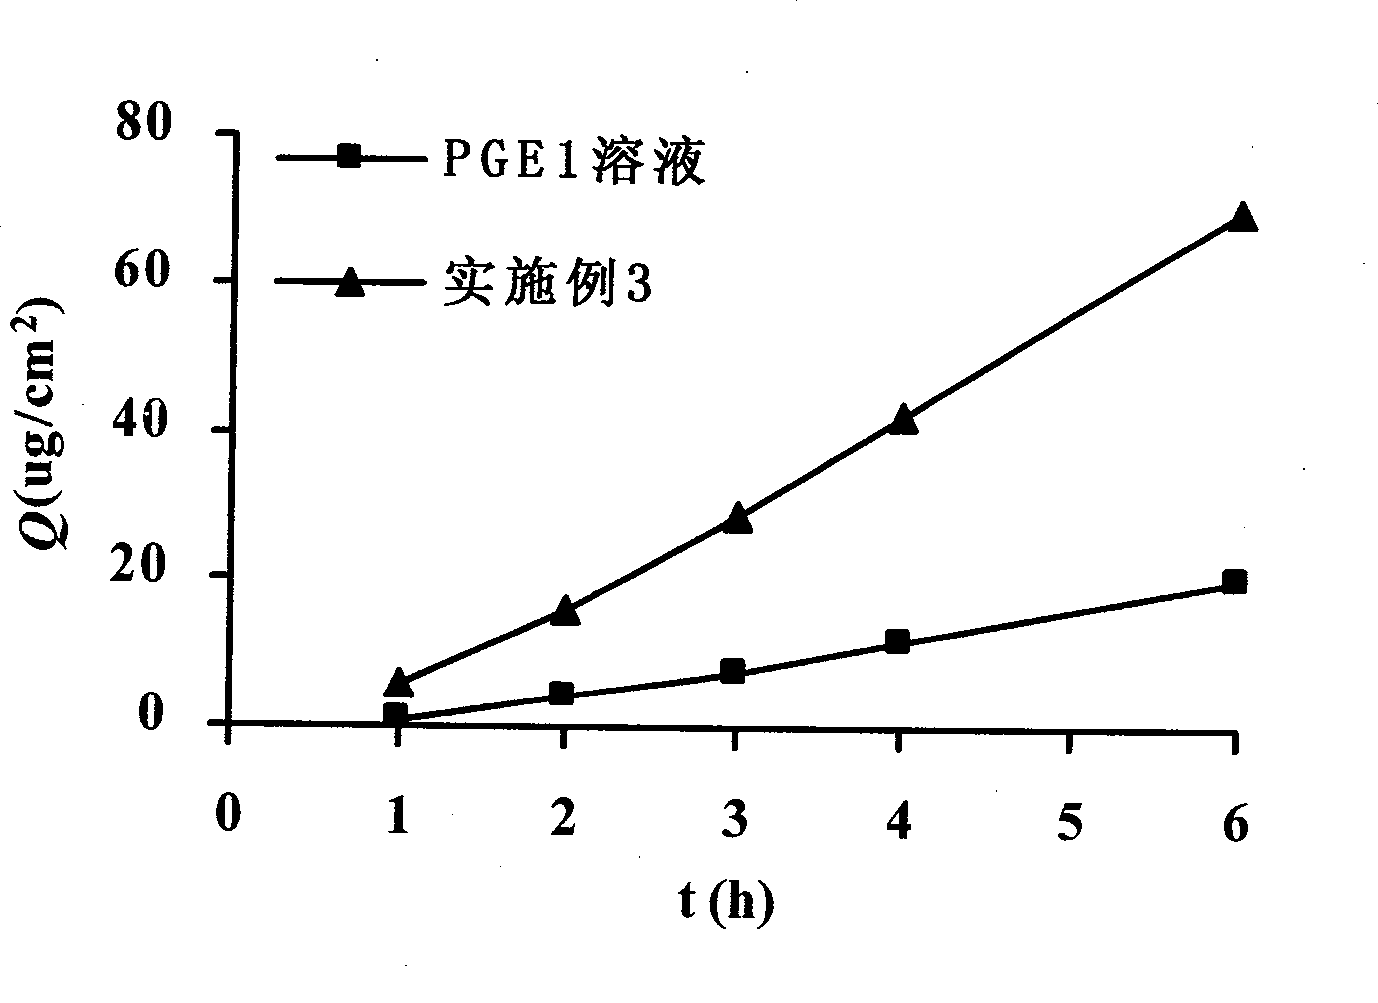 Prostaglandin microemulsion gel rubber preparation and method of producing the same